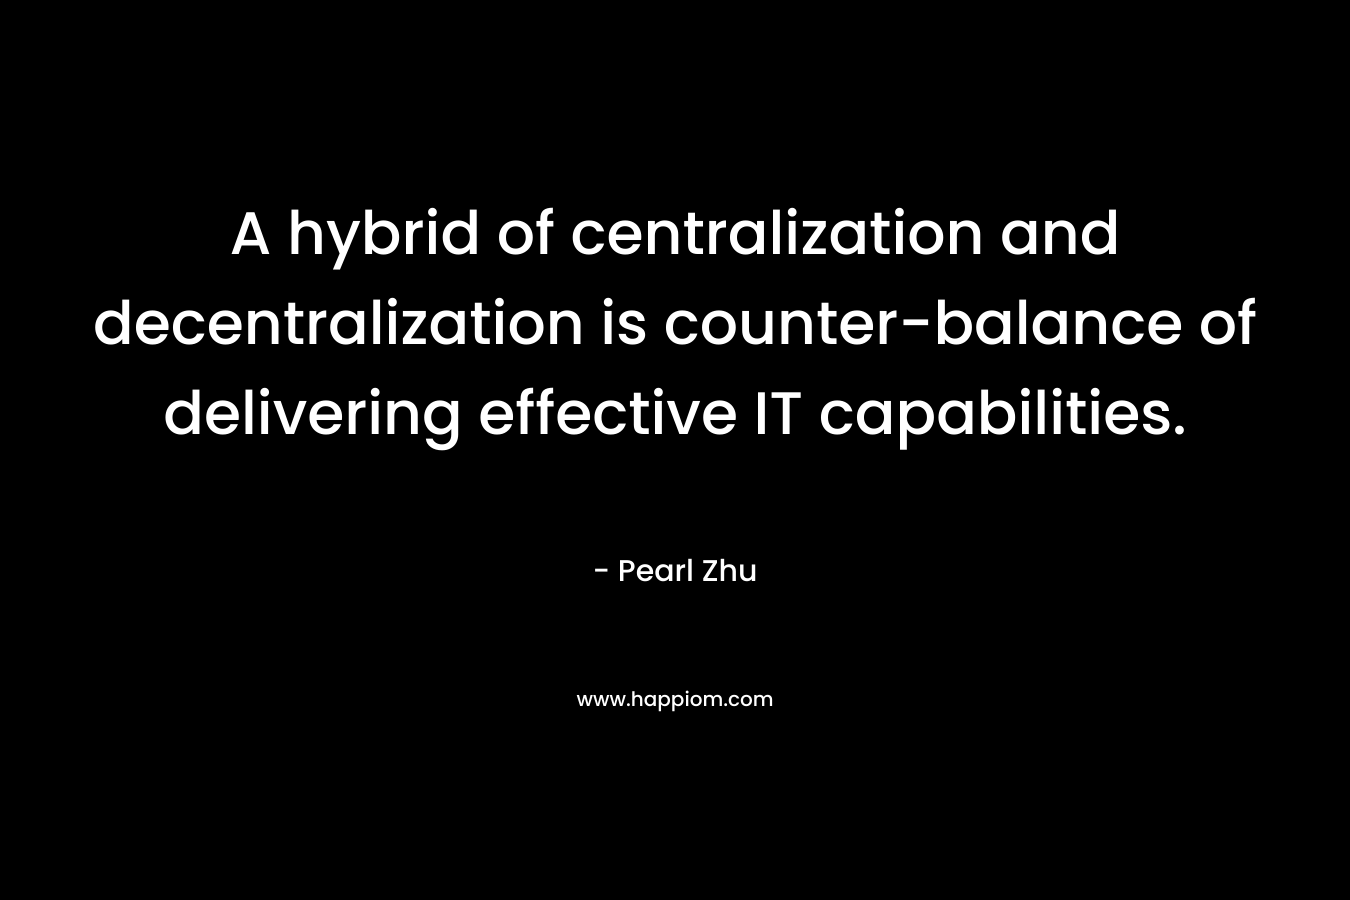 A hybrid of centralization and decentralization is counter-balance of delivering effective IT capabilities.